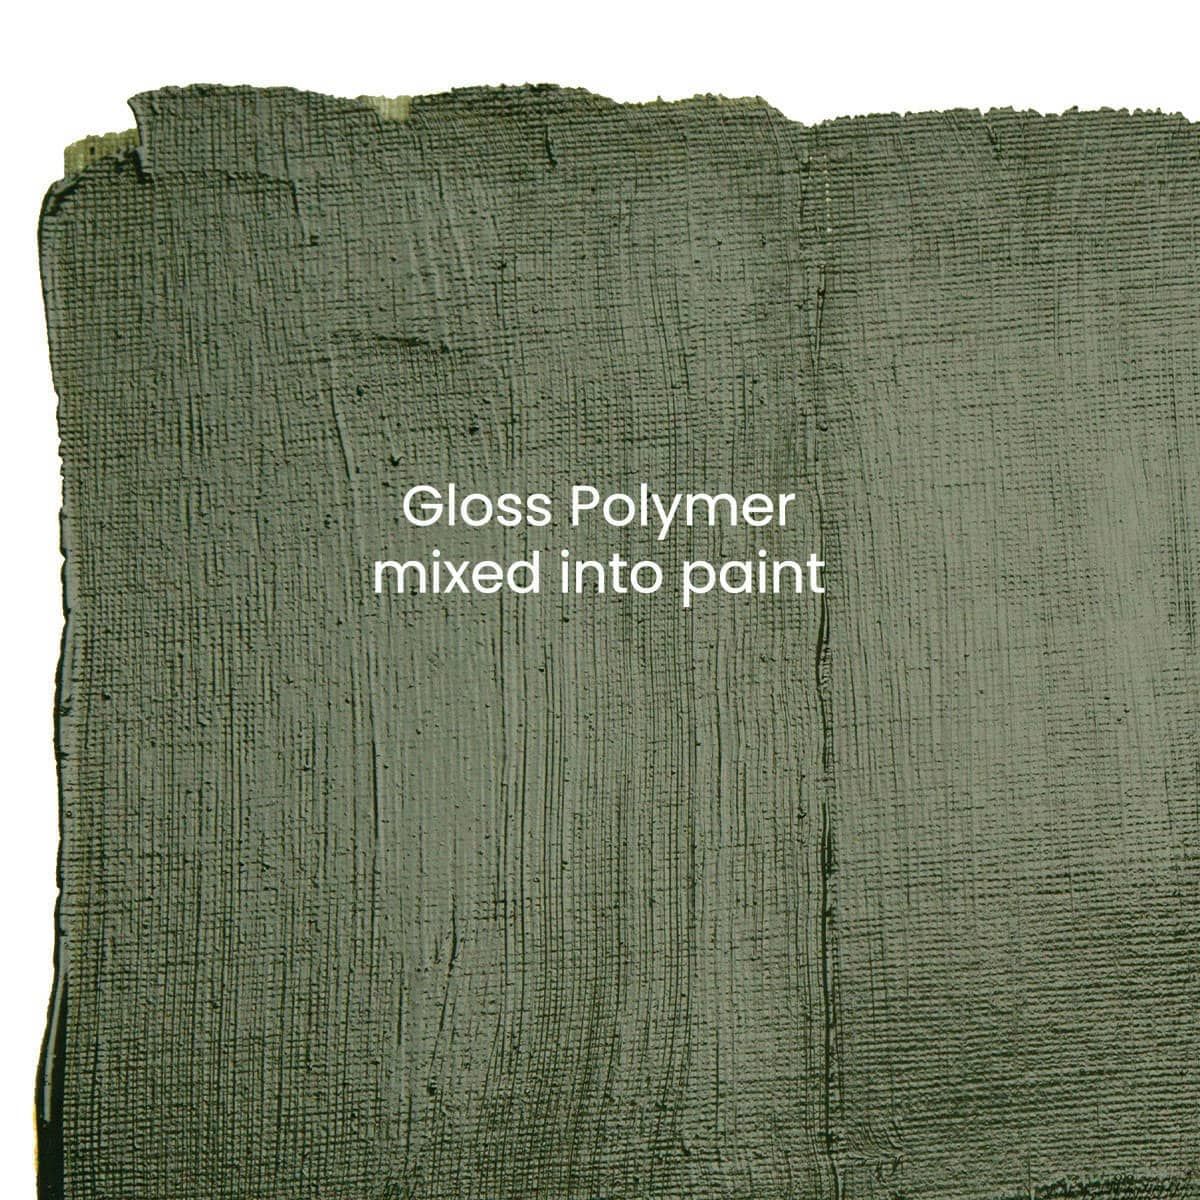 Gloss Polymer mixed into paint